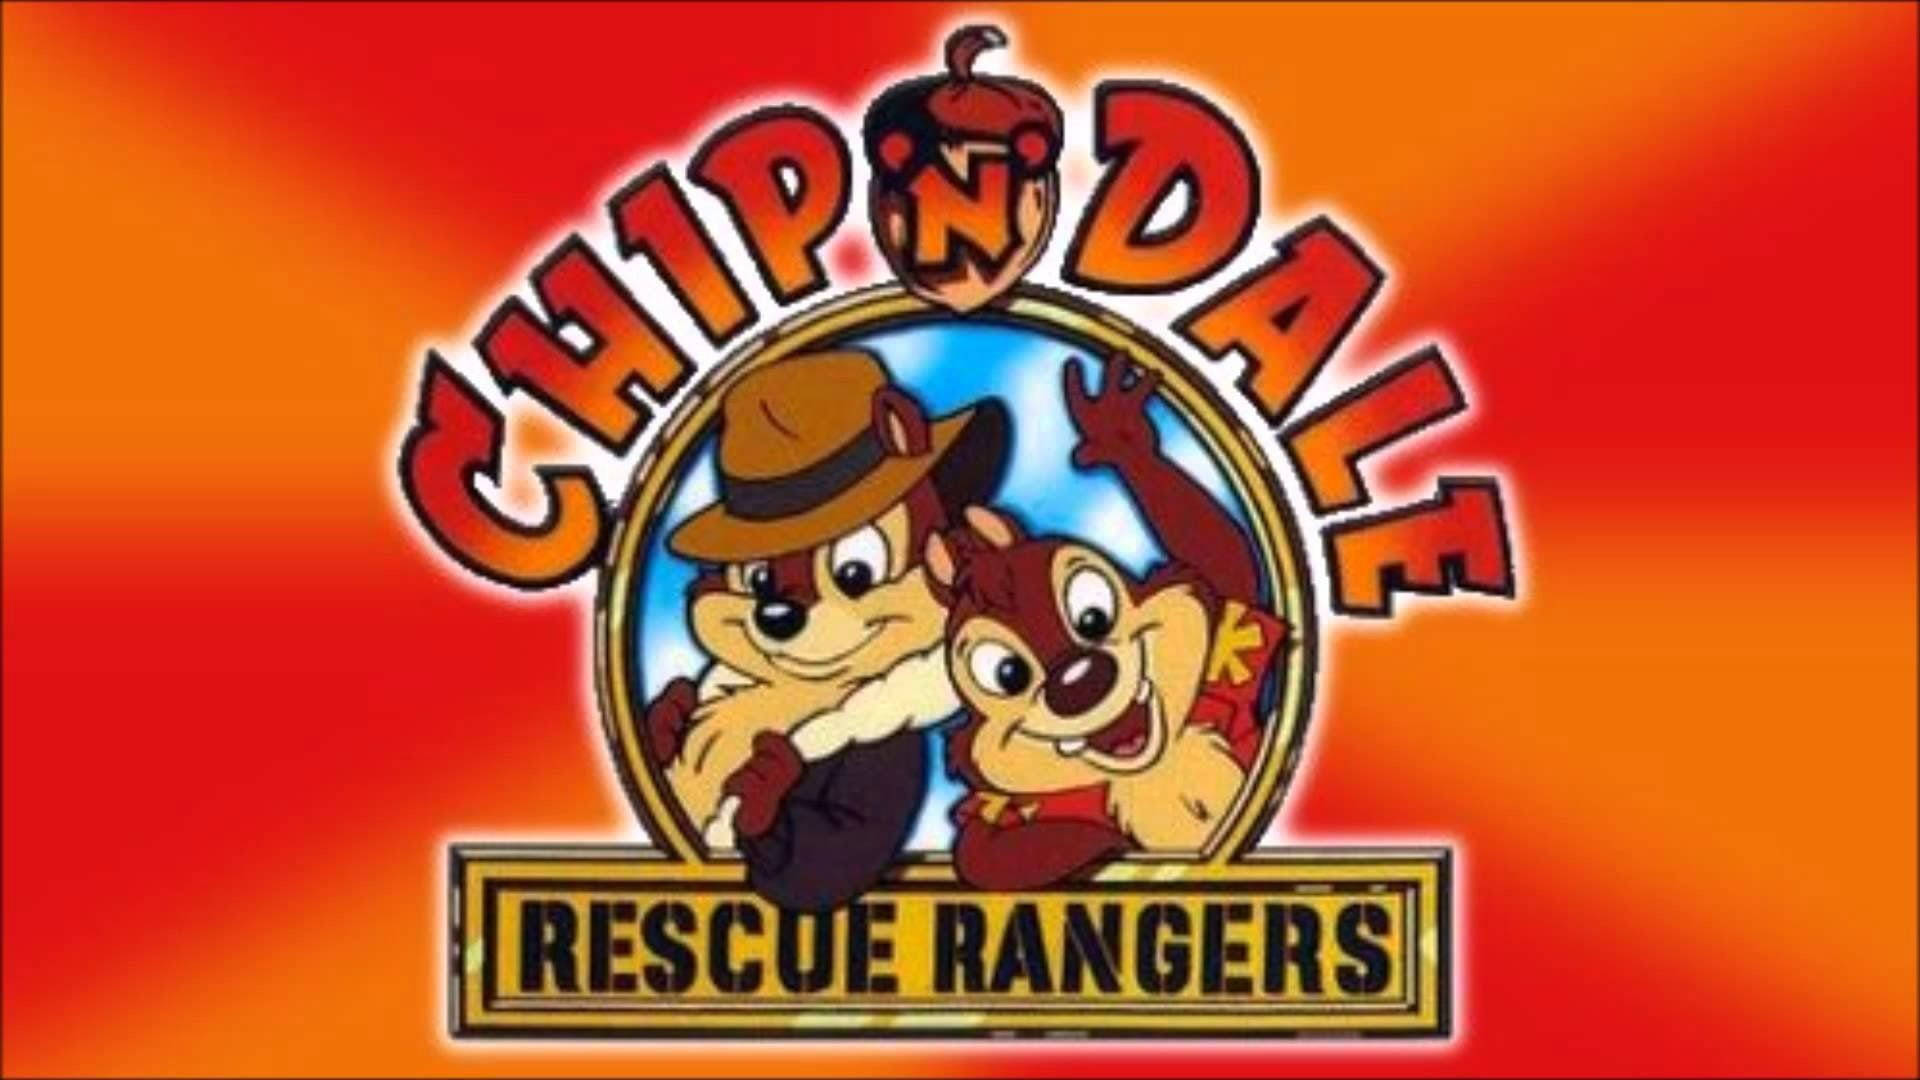 Chip N Dale Rescue Rangers Promotional Show Poster Background